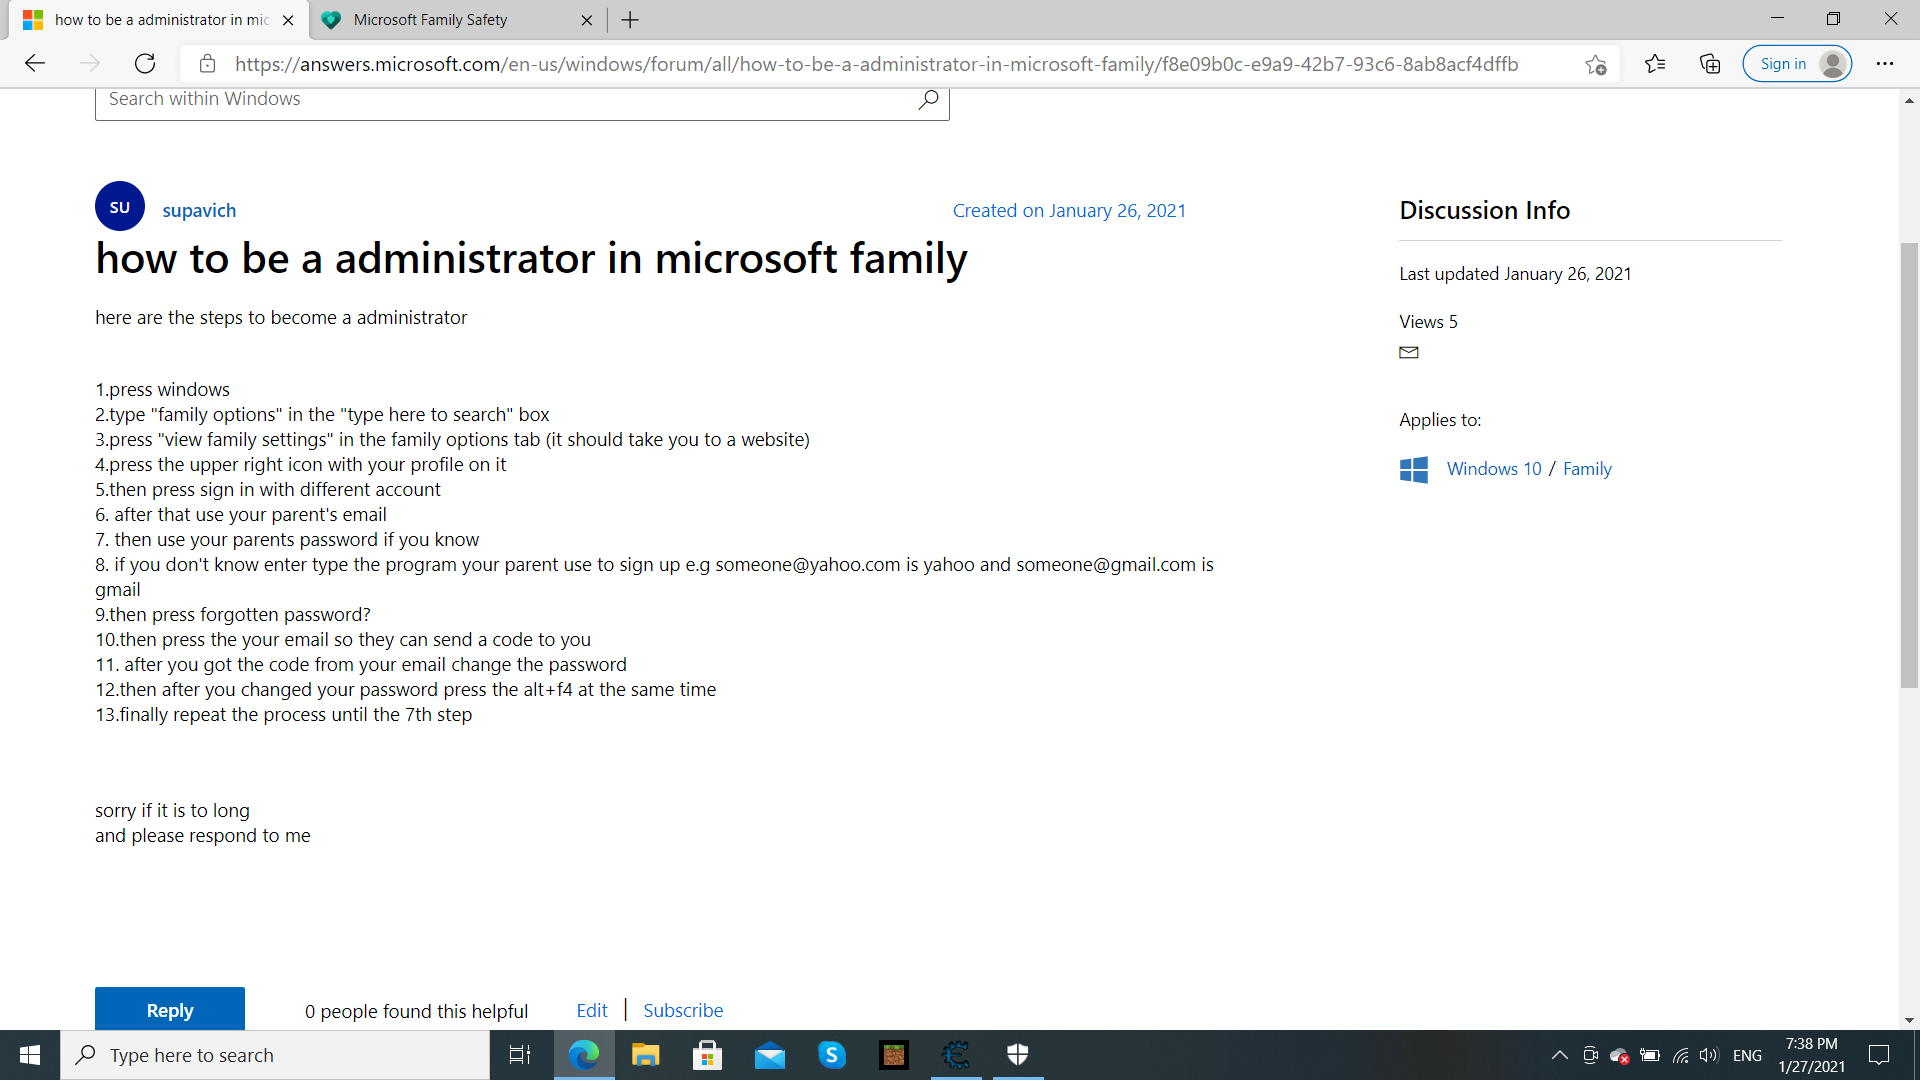 how to stop family options even in parental controls b7d4c22c-95ea-4198-b208-5350429acdb3?upload=true.png